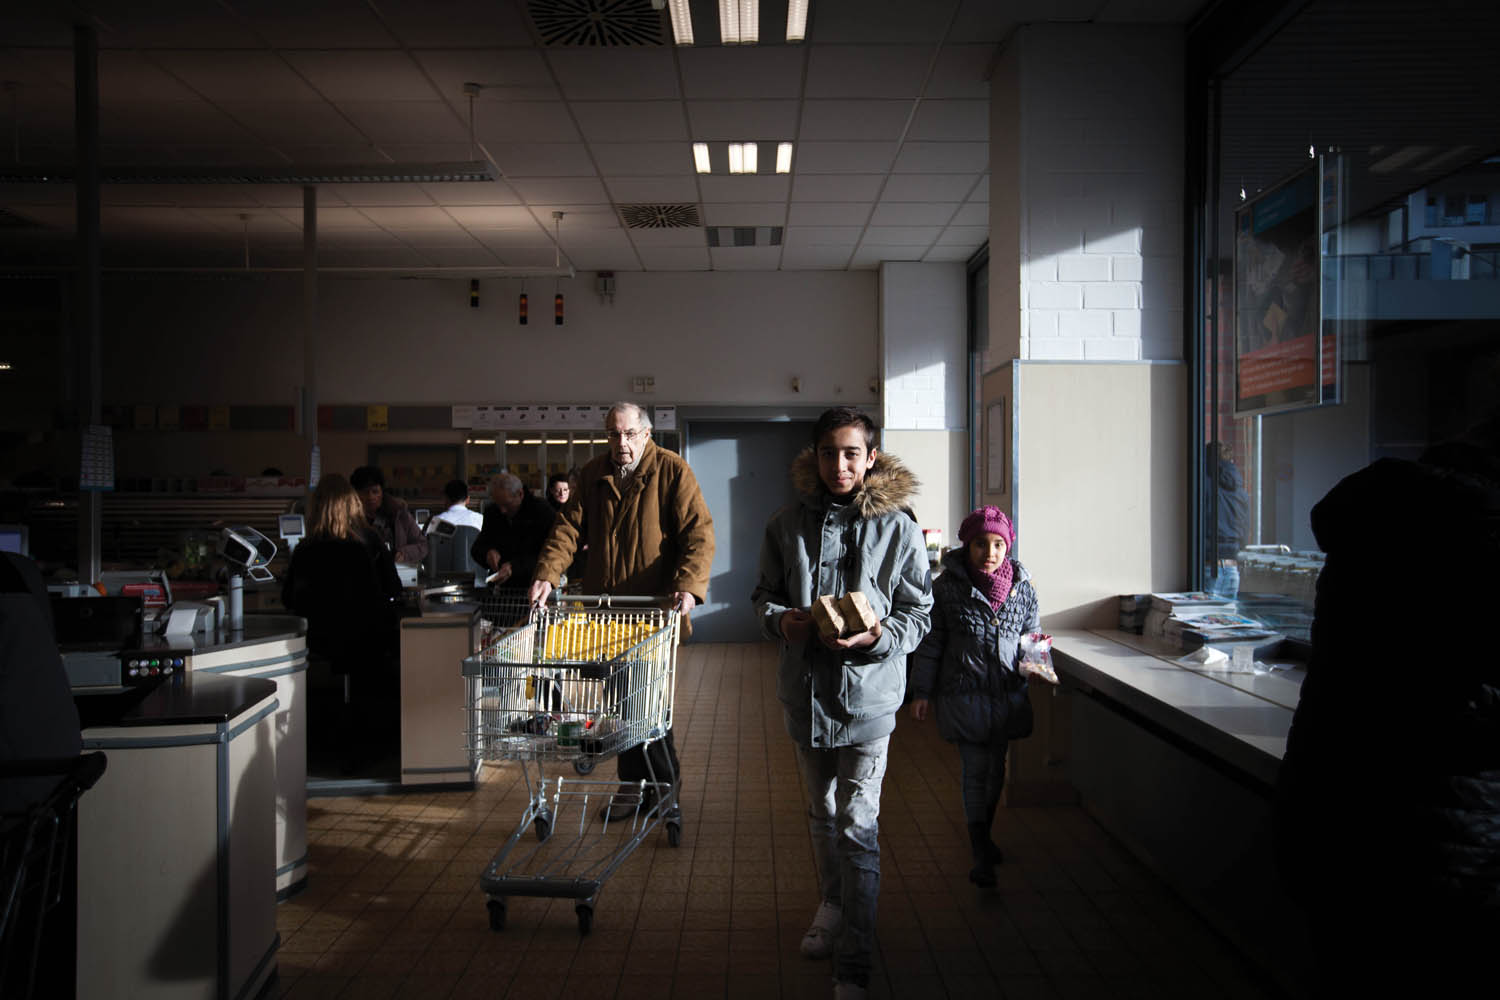 Milad and Mahya at the Aldi Süd discount supermarket in Düsseldorf. The Ahkabyars often shop as far as forty minutes away in order to save money on produce. Photo by Diàna Markosian.